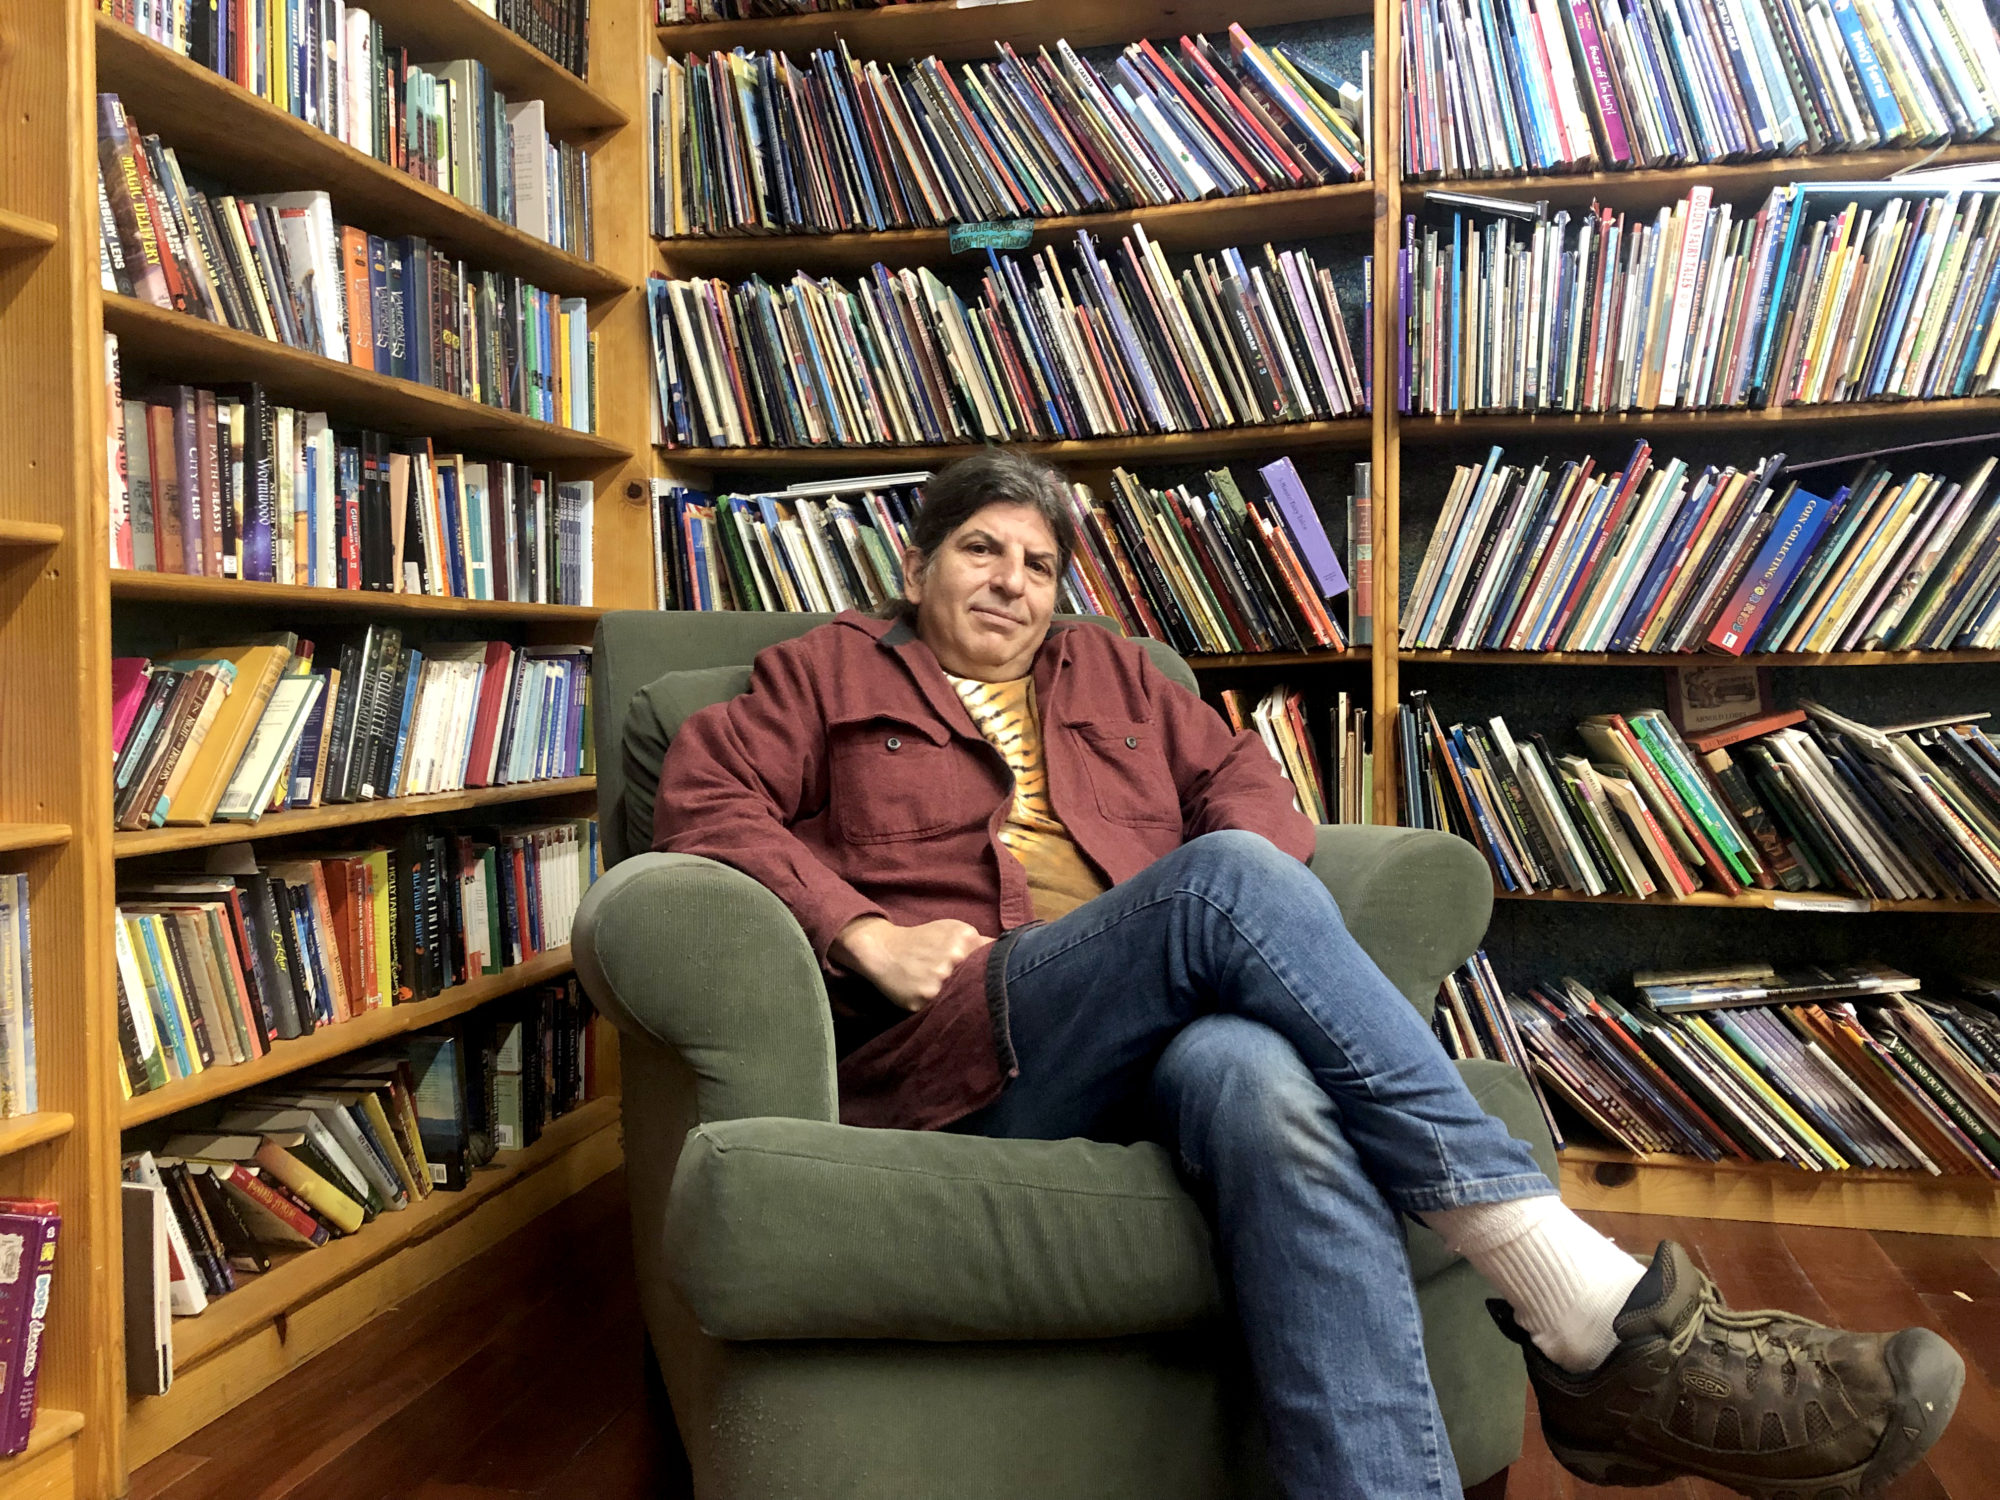 Dan Weinstein, owner of The Iliad Bookstore sits surrounded by books.